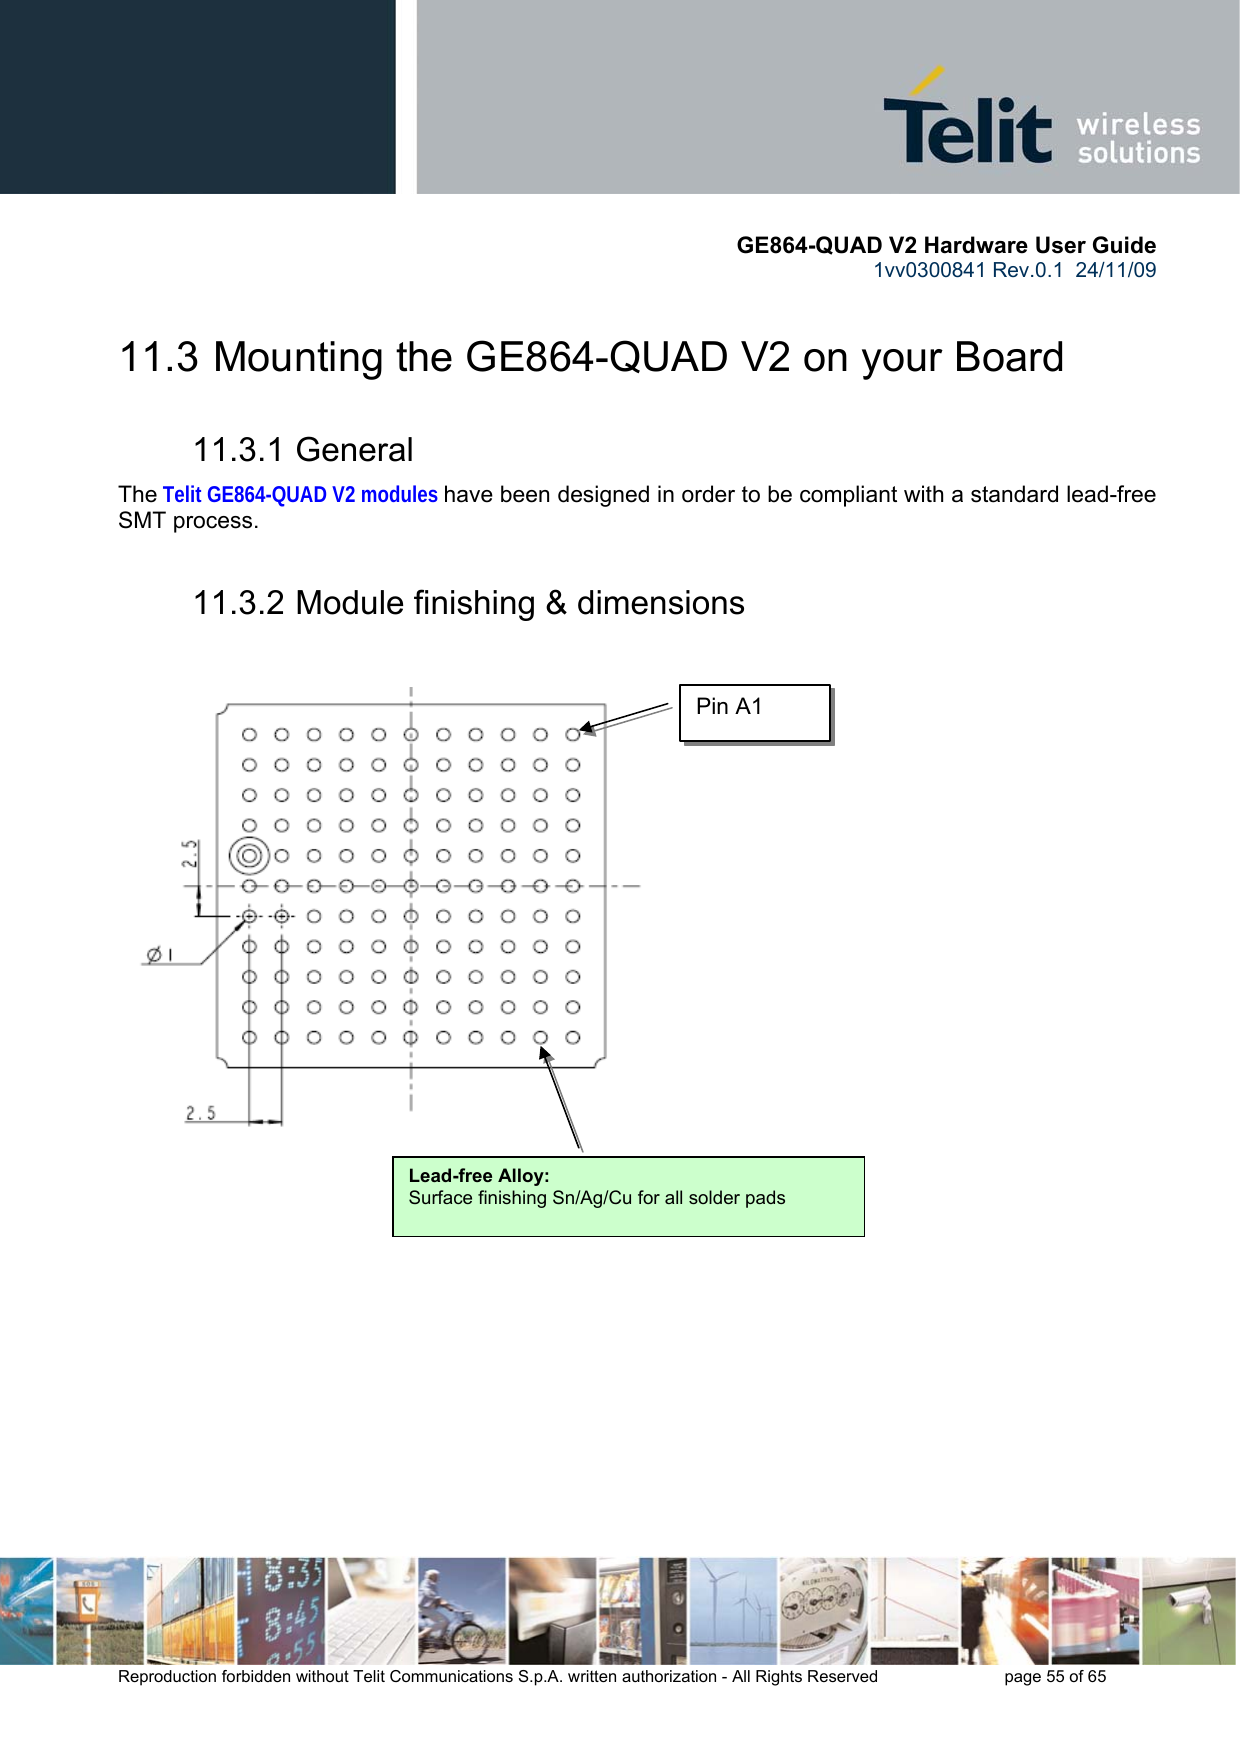       GE864-QUAD V2 Hardware User Guide 1vv0300841 Rev.0.1  24/11/09      Reproduction forbidden without Telit Communications S.p.A. written authorization - All Rights Reserved    page 55 of 65  11.3  Mounting the GE864-QUAD V2 on your Board 11.3.1 General The Telit GE864-QUAD V2 modules have been designed in order to be compliant with a standard lead-free SMT process. 11.3.2 Module finishing &amp; dimensions                   Lead-free Alloy:Surface finishing Sn/Ag/Cu for all solder pads Pin A1 